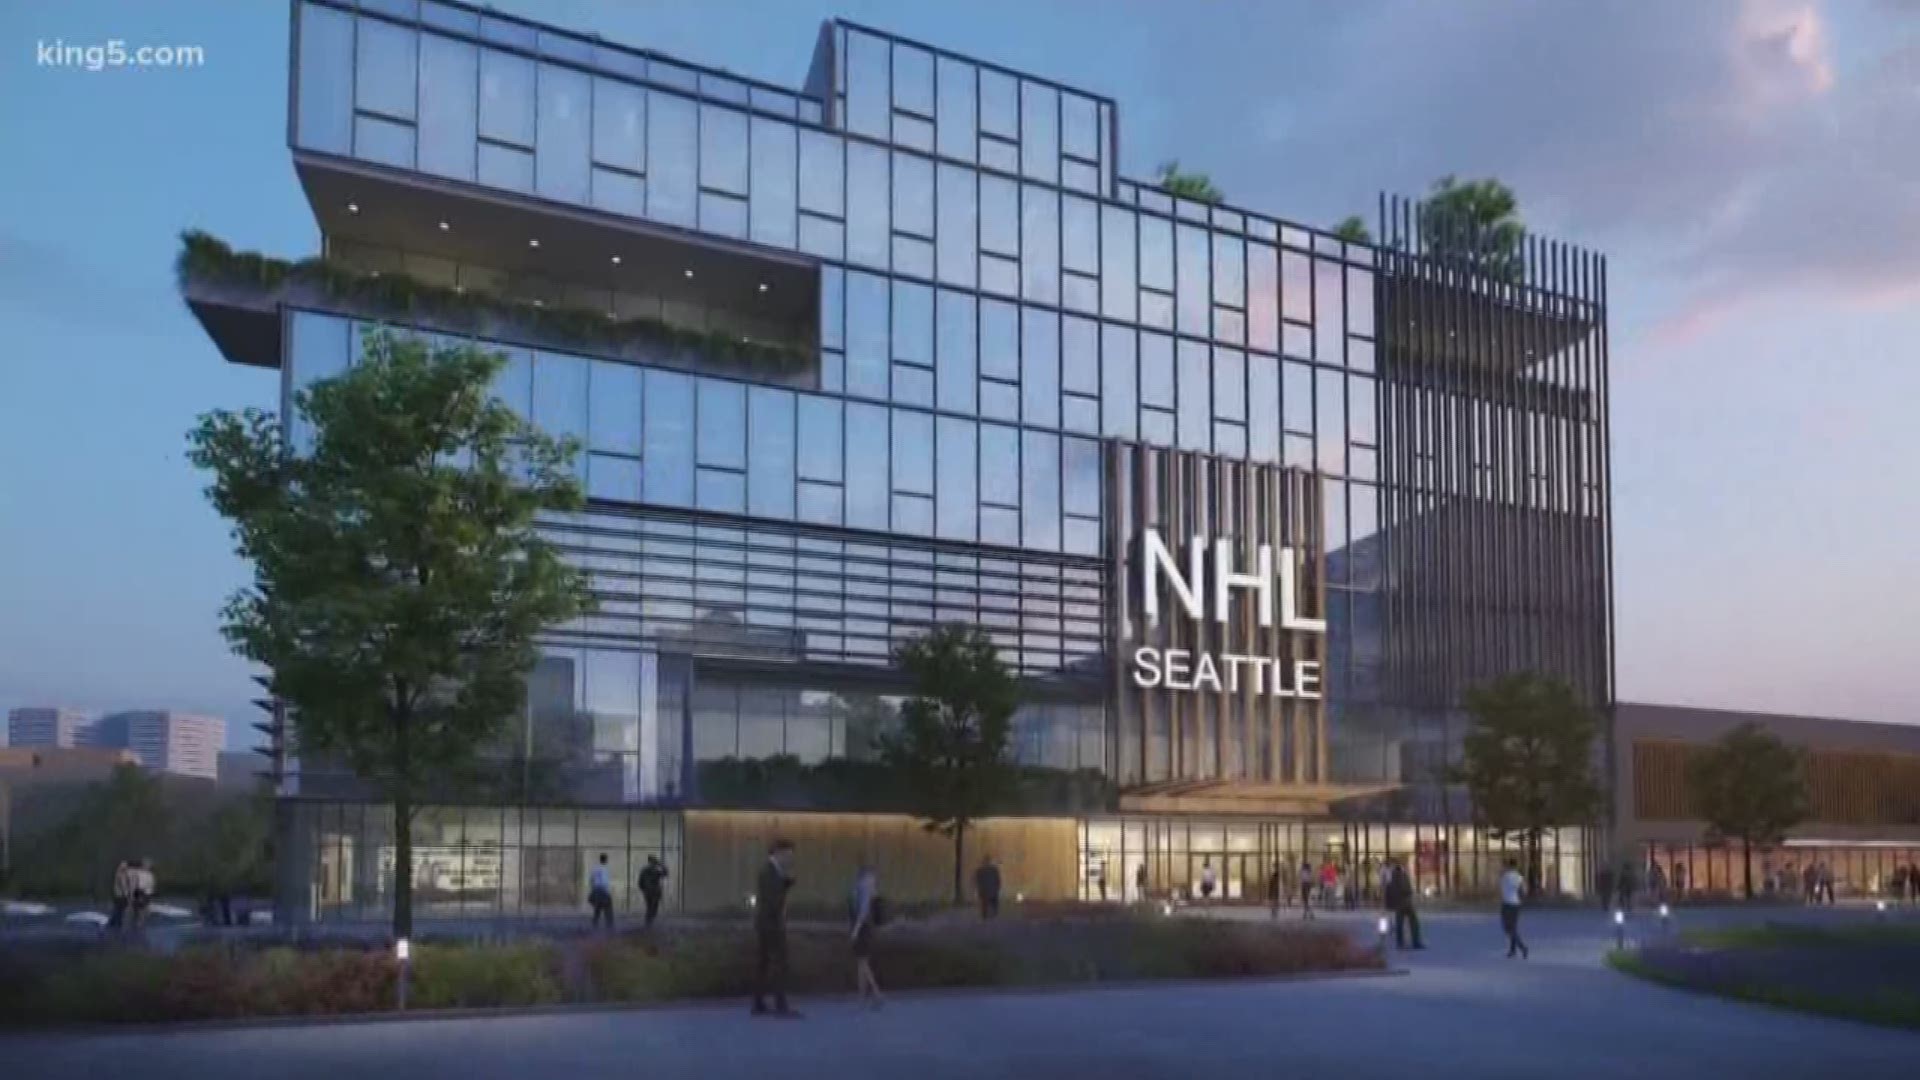 Seattle’s Northgate Mall isn't going away but it is changing dramatically. Developers plan to turn the mall into a new headquarters and training facility for the new NHL Seattle franchise.